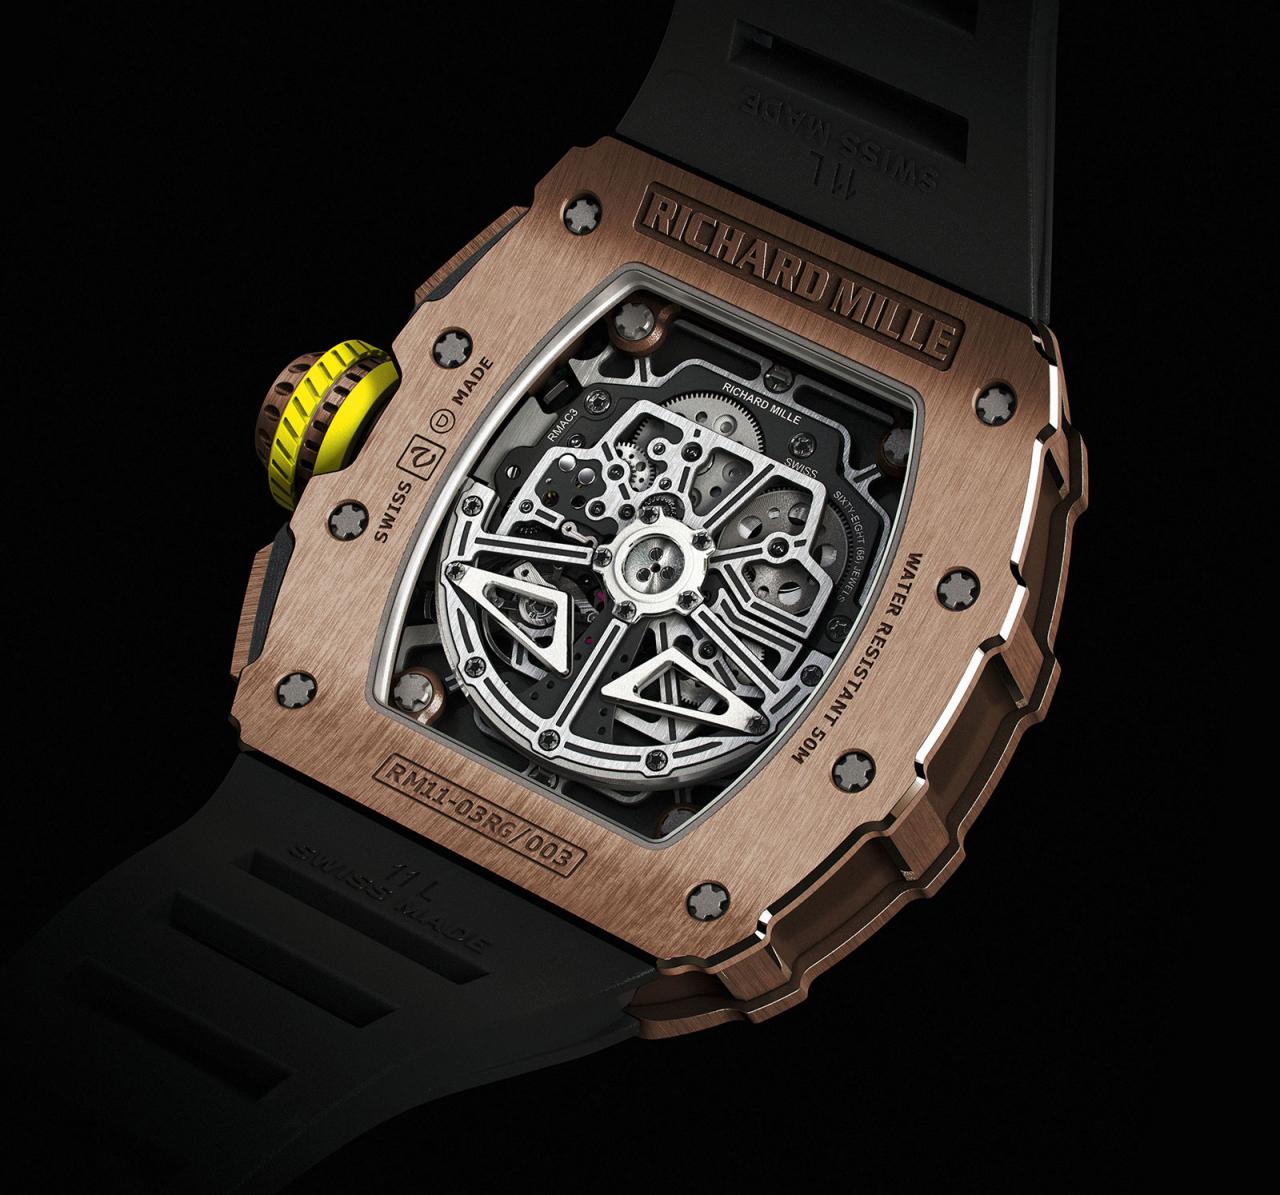 Richard Mille RM 11-03 red gold 2